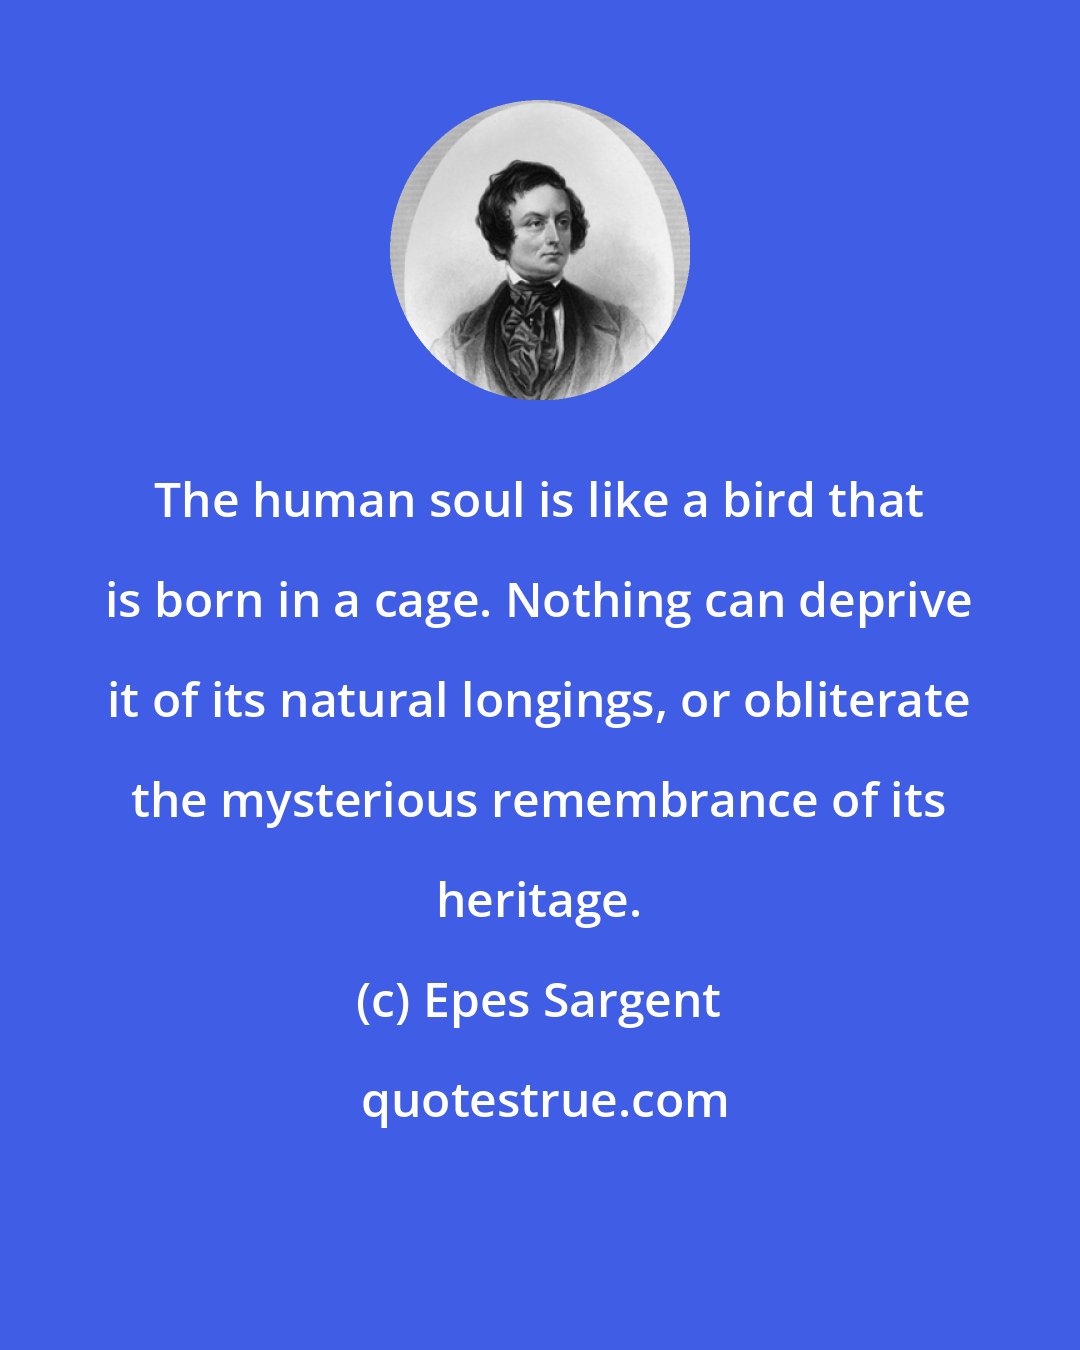 Epes Sargent: The human soul is like a bird that is born in a cage. Nothing can deprive it of its natural longings, or obliterate the mysterious remembrance of its heritage.